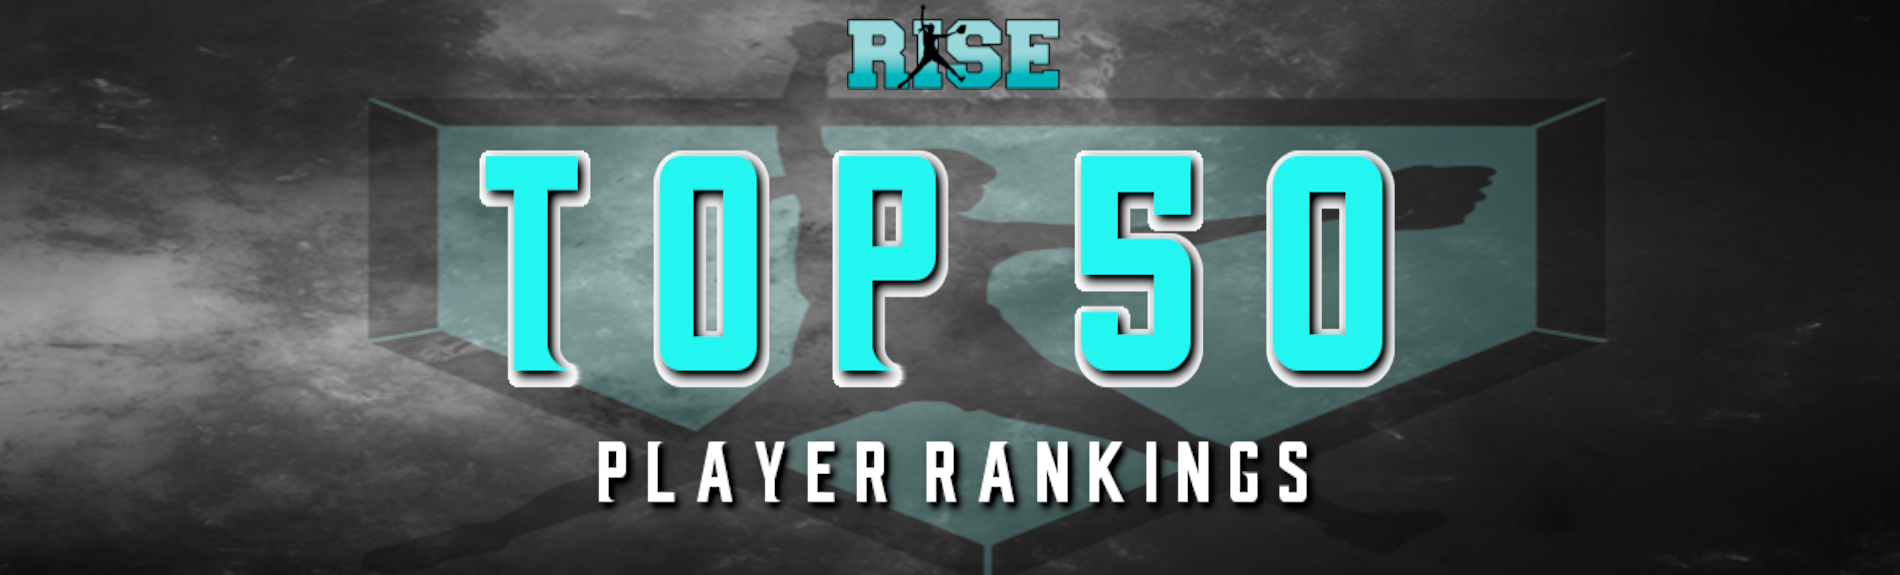 RISE “Top 50” Player Rankings